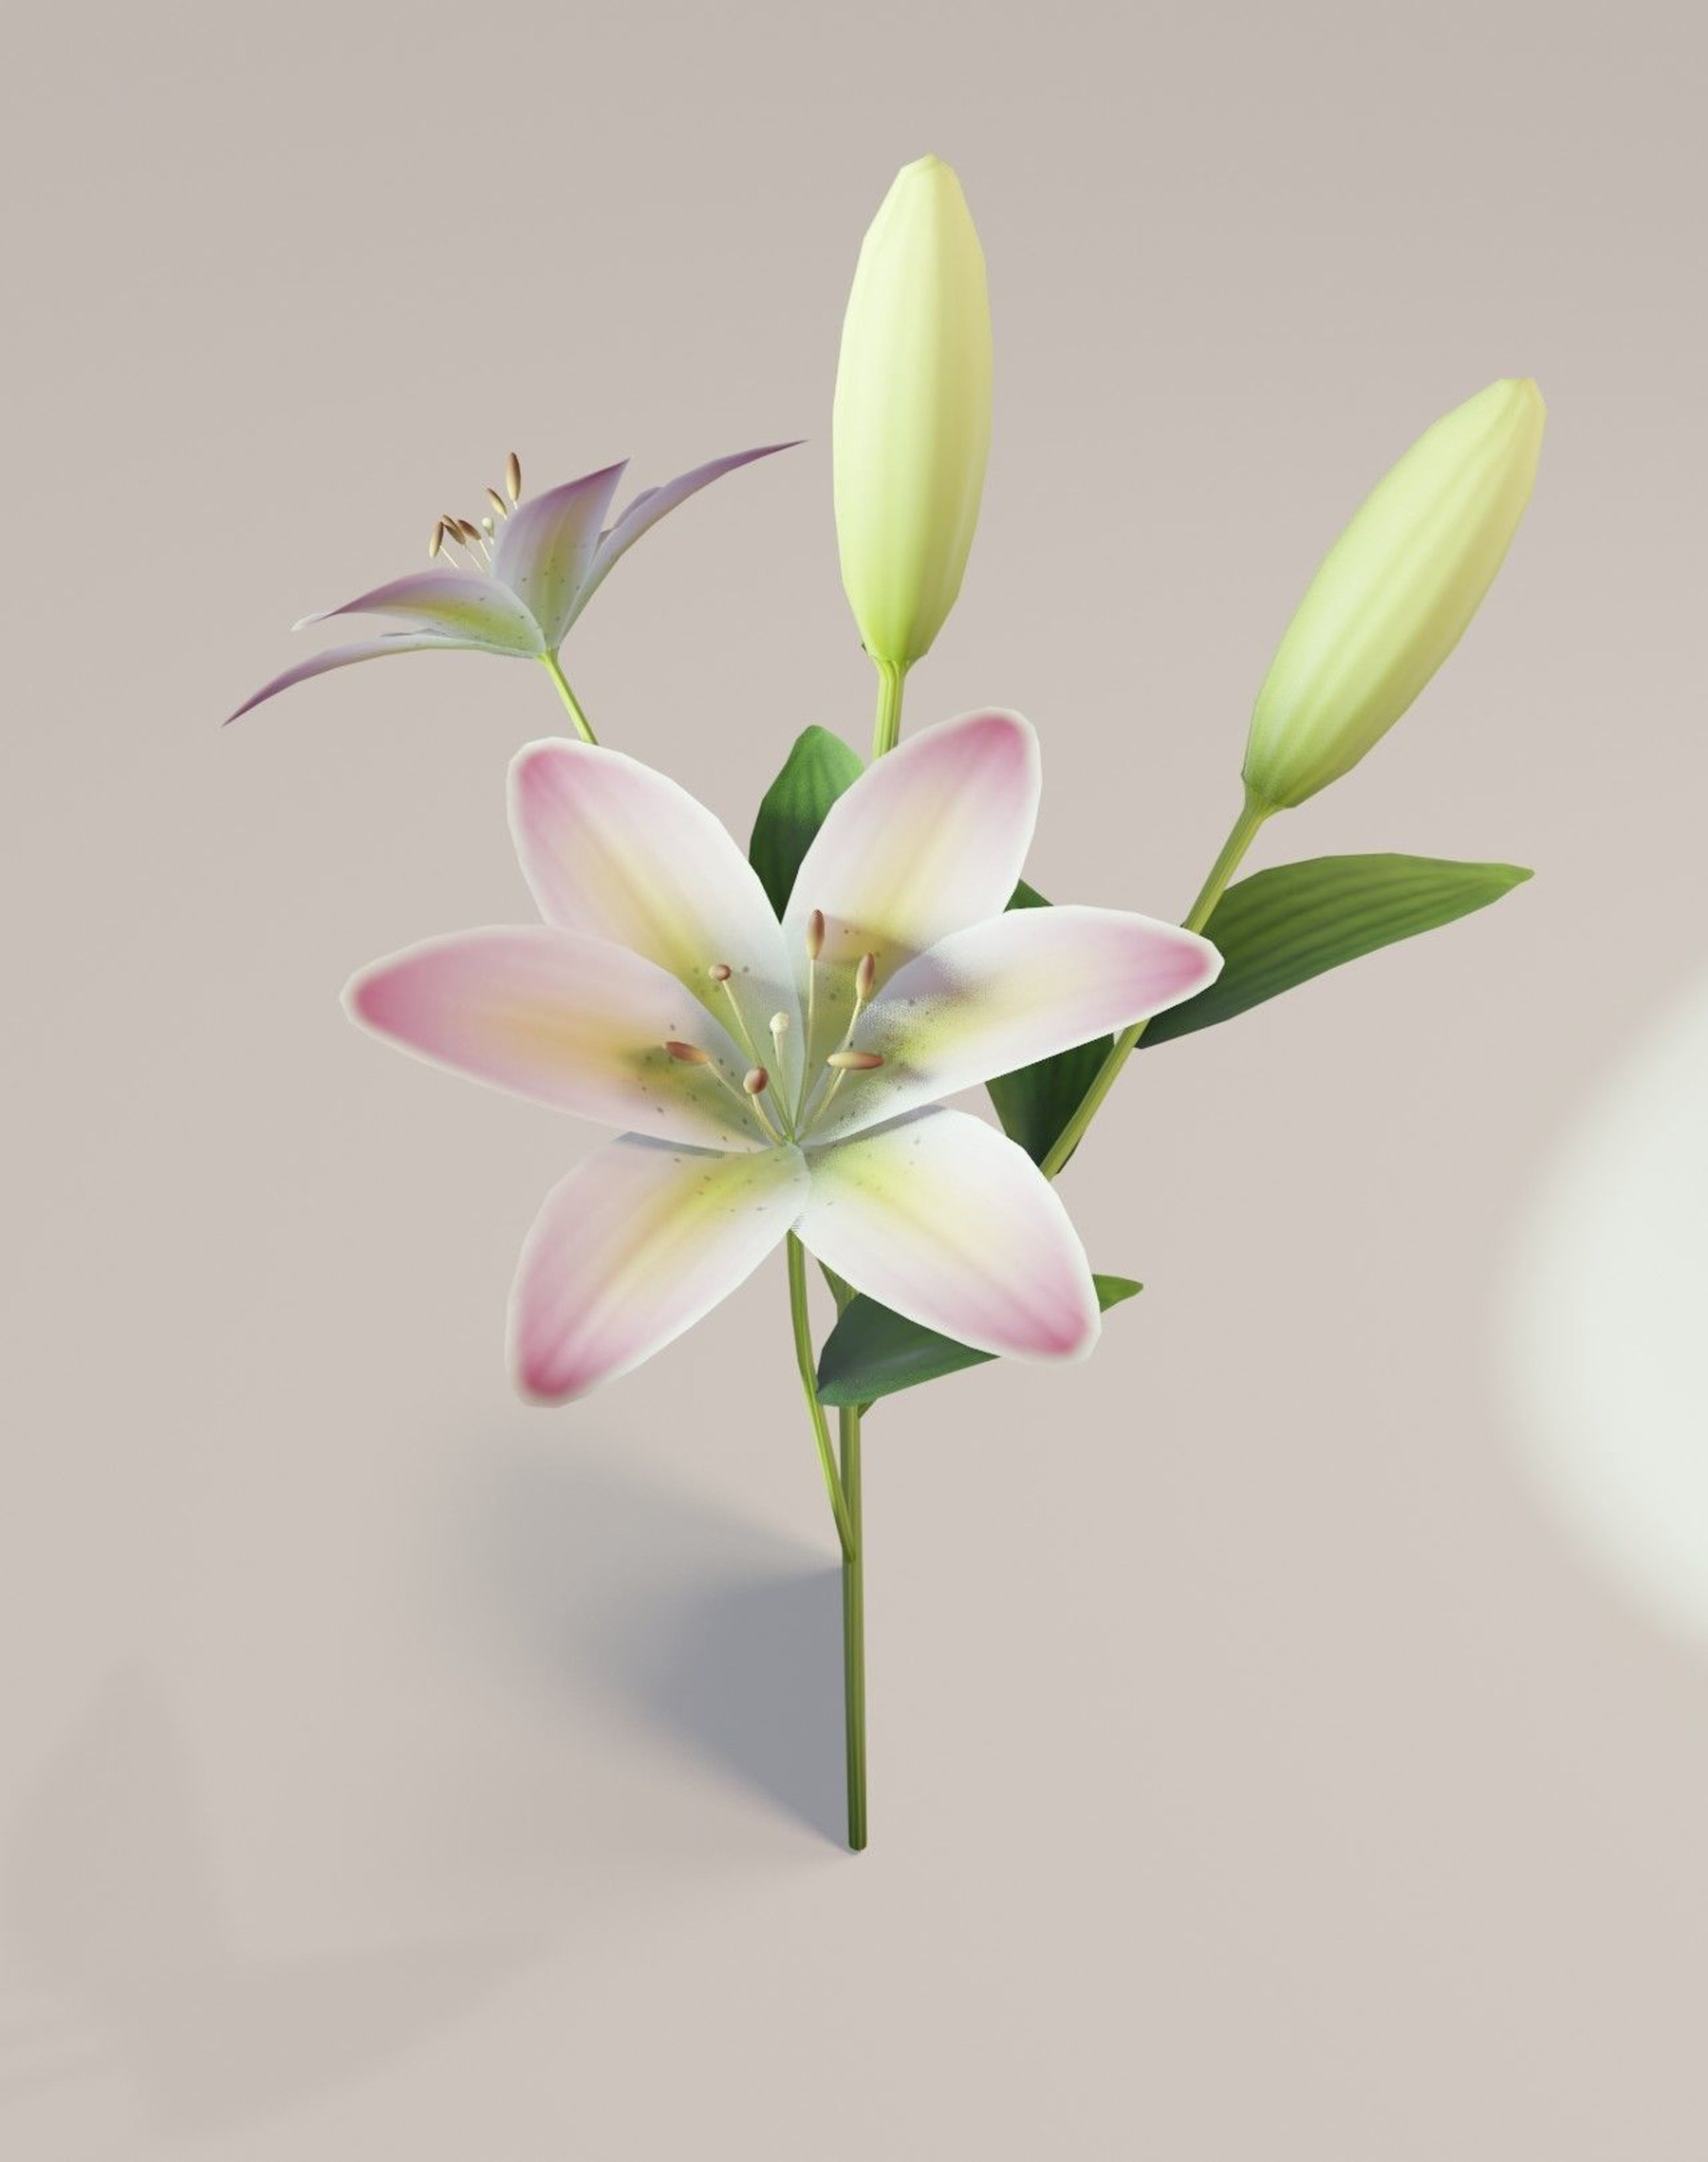 1,430,039 Lily Images, Stock Photos, 3D objects, & Vectors